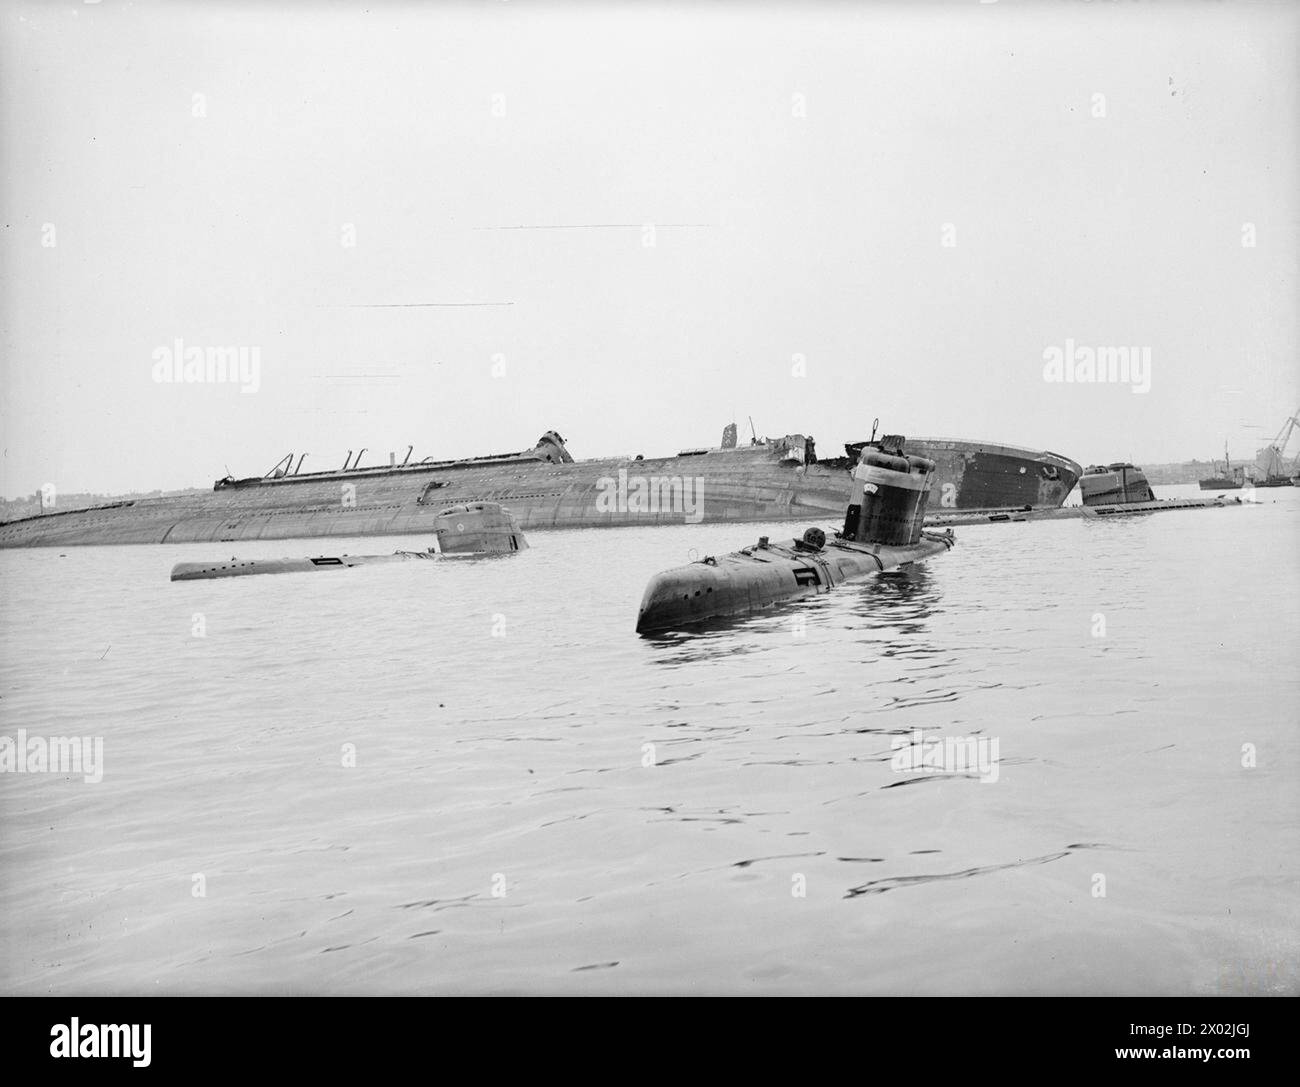 VIEWS IN KIEL AND DISTRICT. 25 MAY 1945, VARIOUS ASPECTS OF LIFE IN THE GERMAN NAVAL BASE AND TYPES OF U-BOATS USED BY THE ENEMY AS THEY WERE INSPECTED BY BRITISH SUBMARINE OFFICERS. - Scuttled type XXI ocean going electric U-boats and the bombed and sunk Hamburg-Amerika liner NEW YORK at Kiel Stock Photo